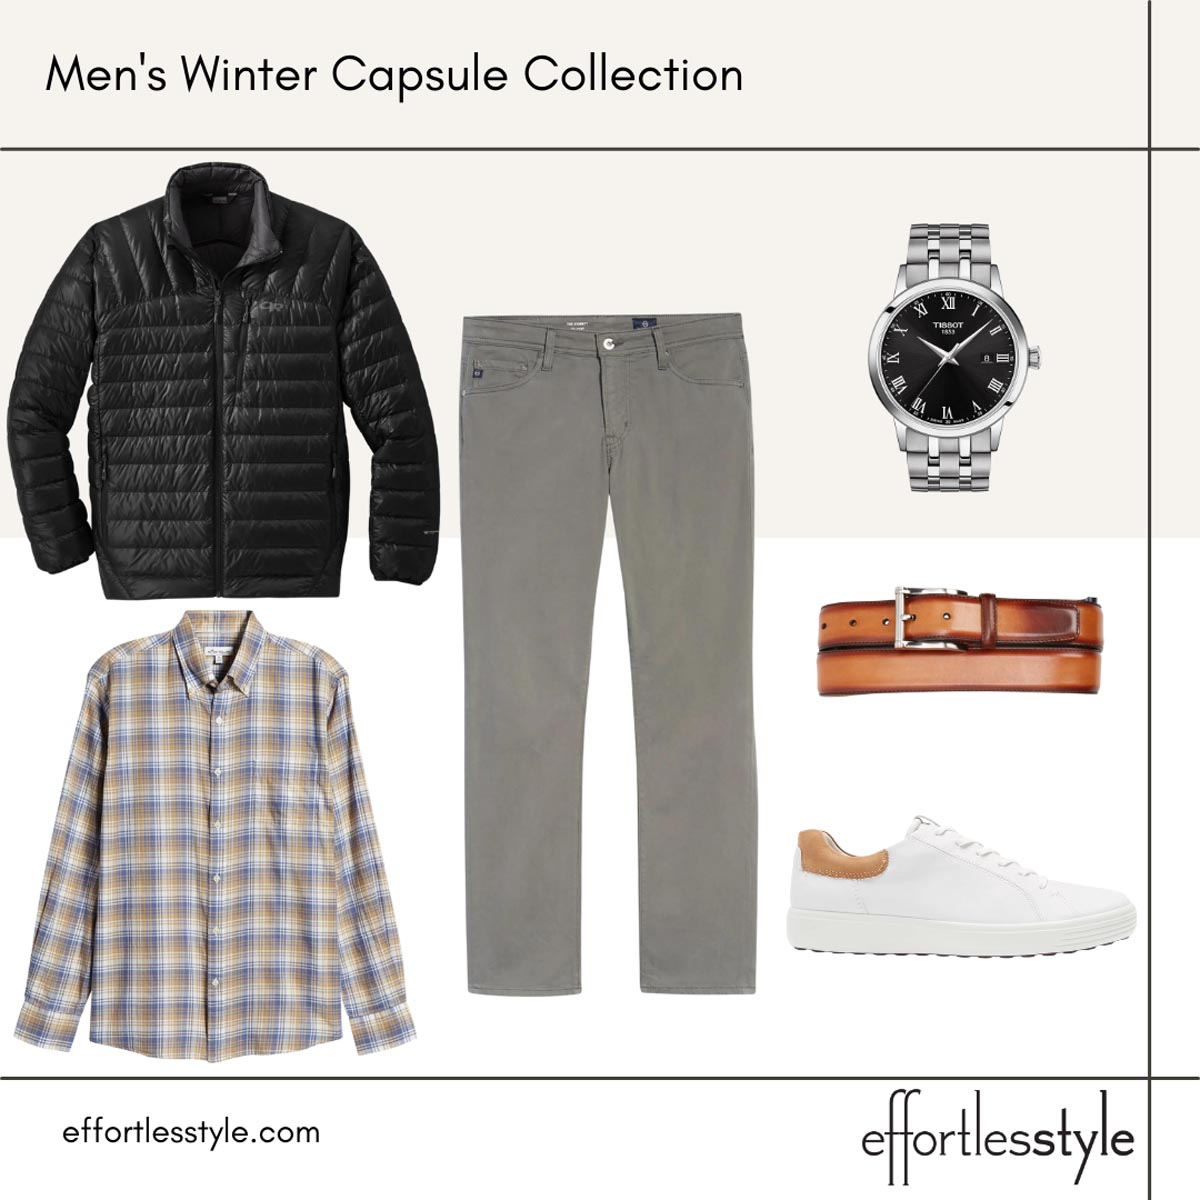 Men's Winter Capsule Collection plaid shirt outfits how to wear a plaid shirt plaid shirt style inspiration for guys button-up shirt outfits button-down shirt outfits for men button-up shirt and chinos plaid shirt and chinos button-up shirt and sneakers